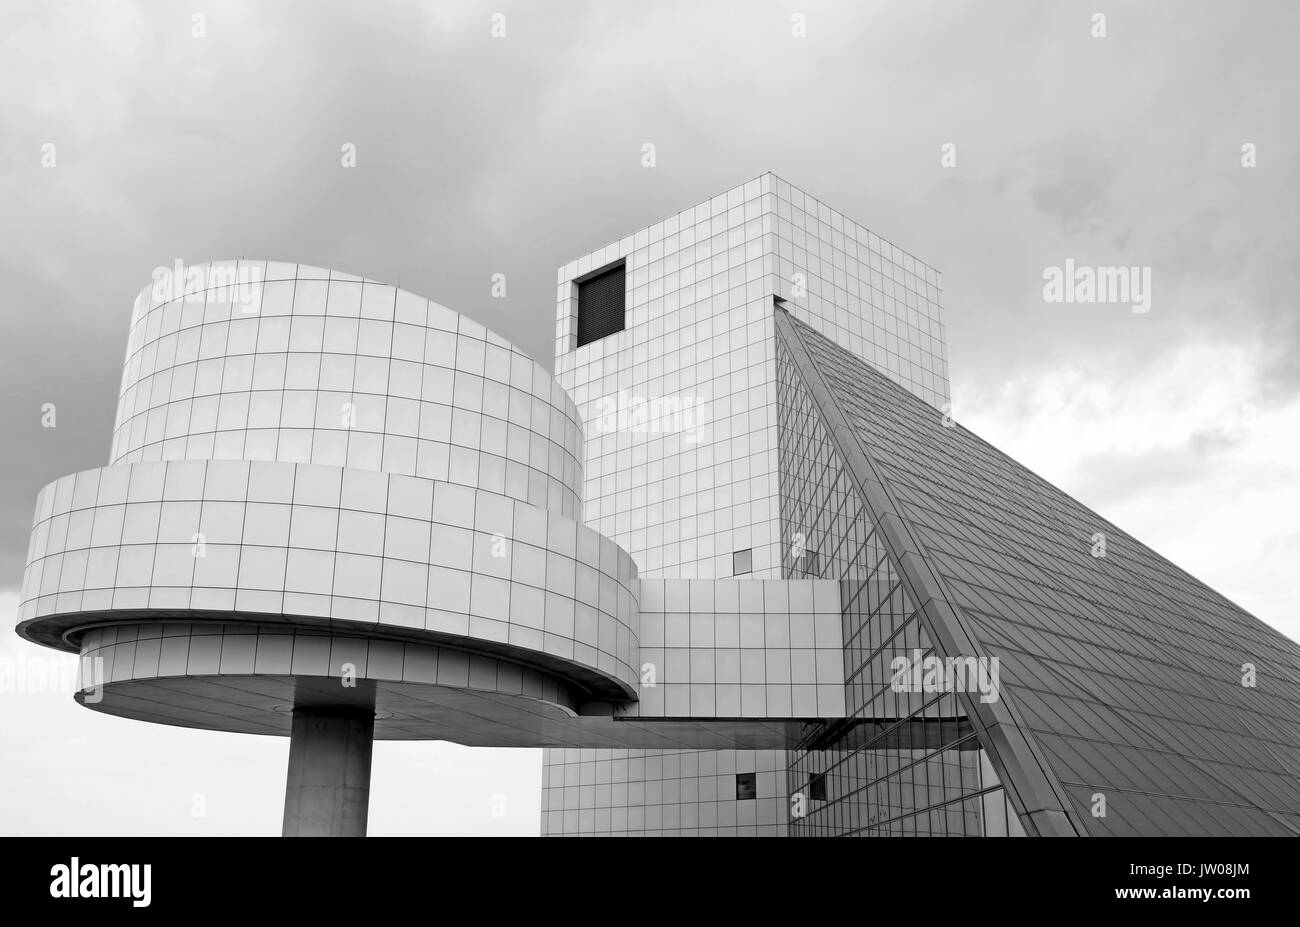 Rock and Roll Hall of Fame designed by I.M.Pei stands out against a cloudy Cleveland, Ohio skies. Stock Photo